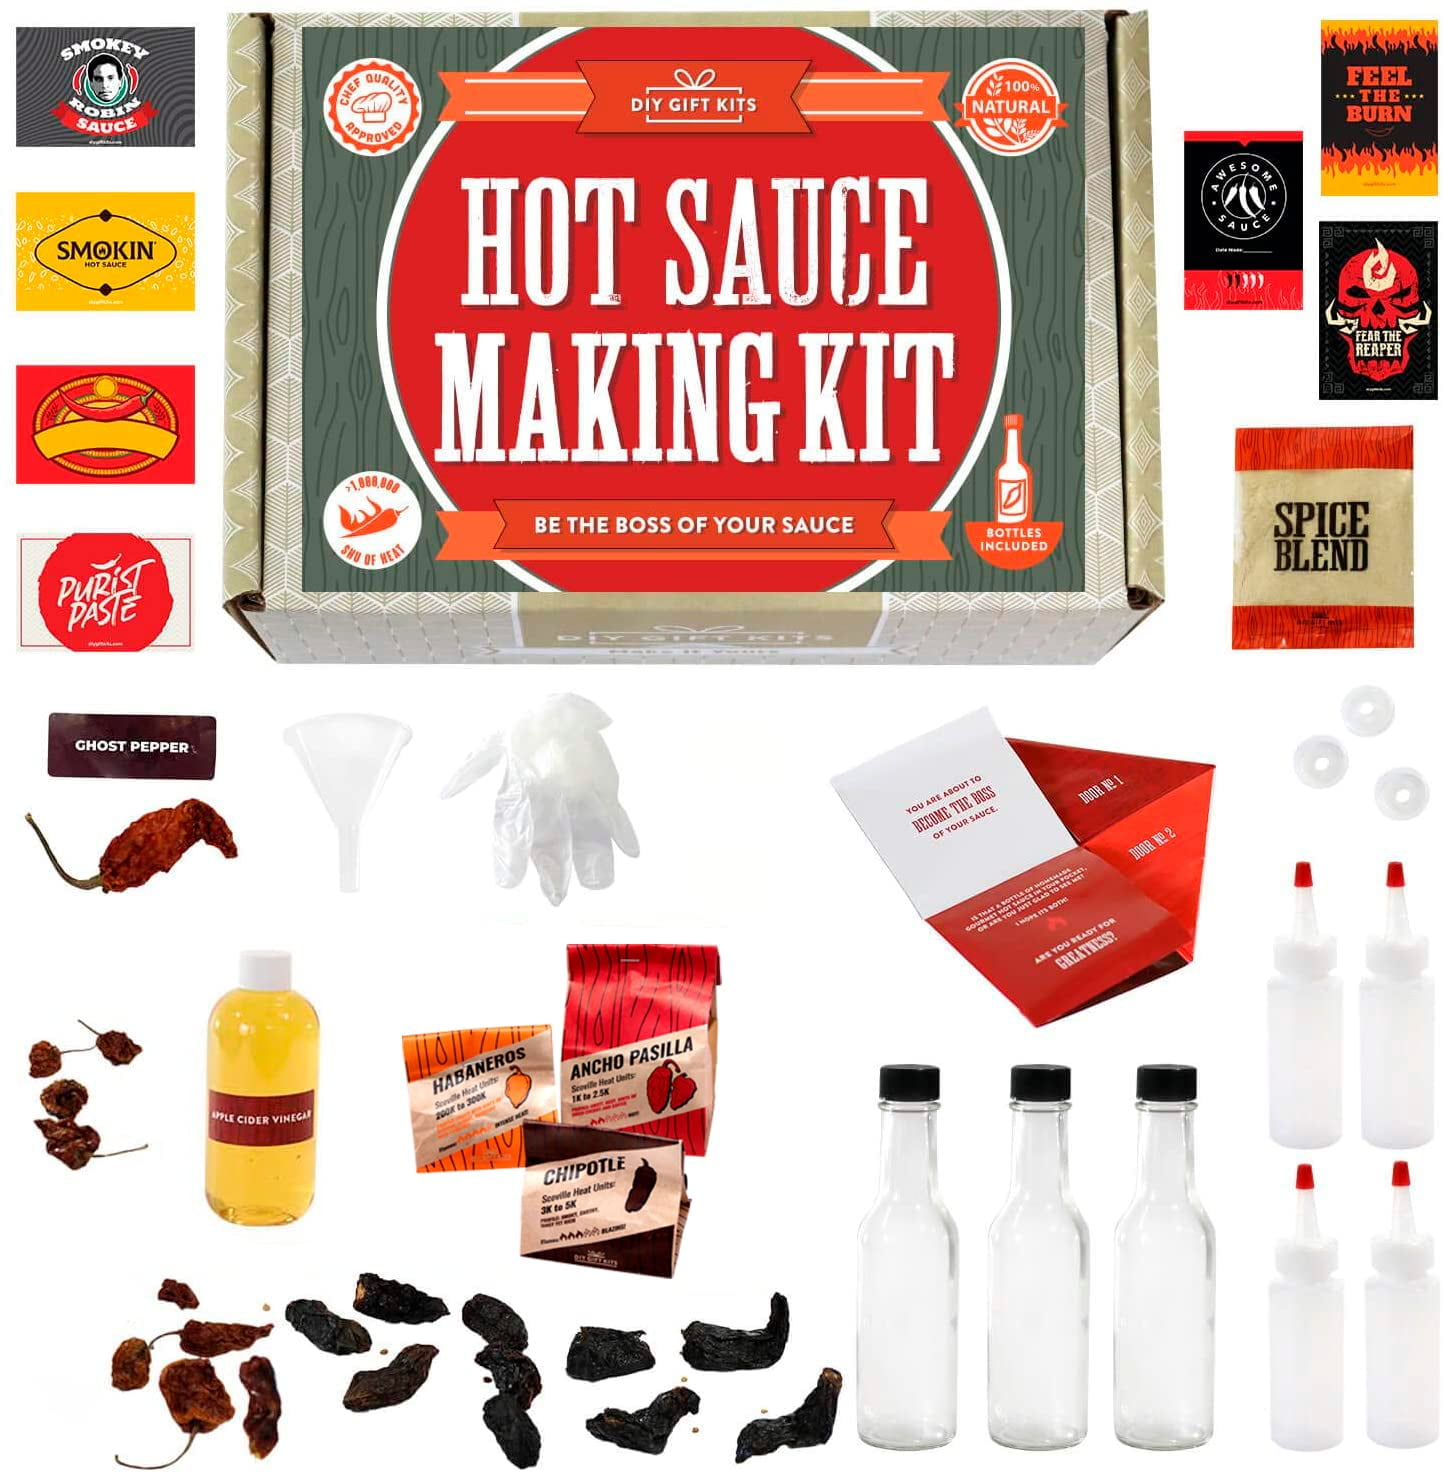 DIY Gift Kits Standard Hot Sauce Making Kit with Everything Included for DIY; Make Your Own Hot Sauce Kit for Adults; Ingredients, 3 Recipes, and Bottles Included; Gift For Birthdays, Fathers